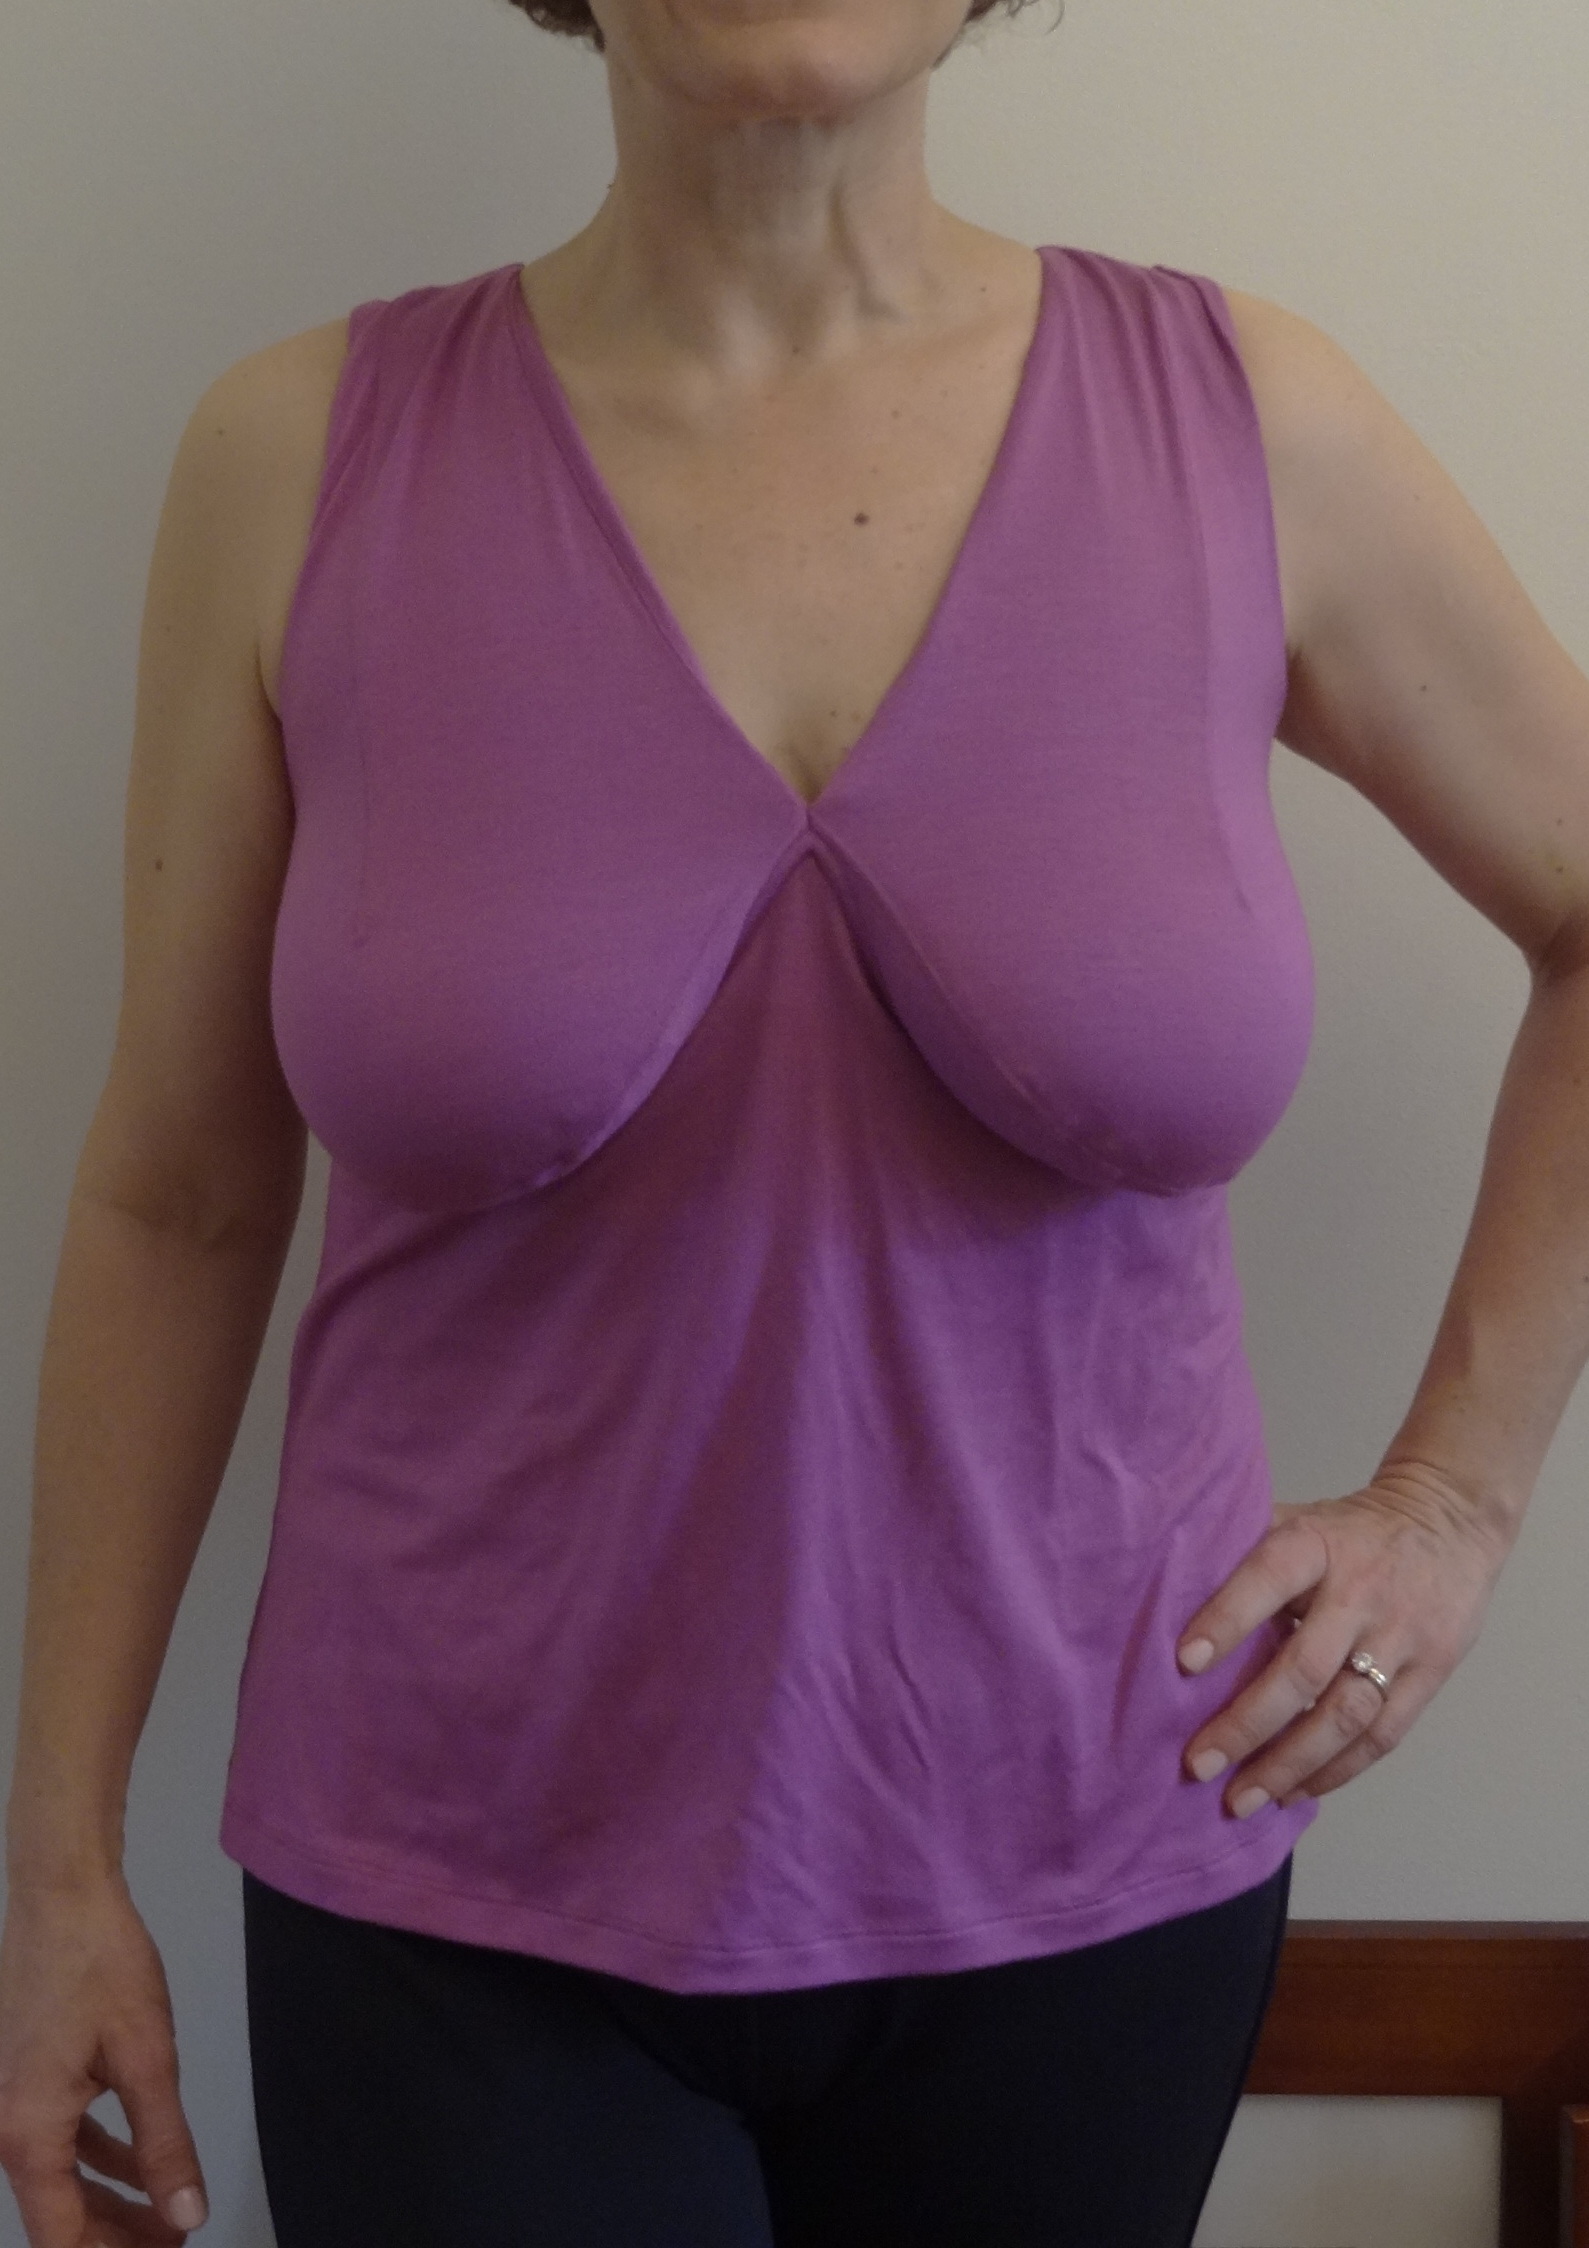 Full Bust Finds Breastnest Review